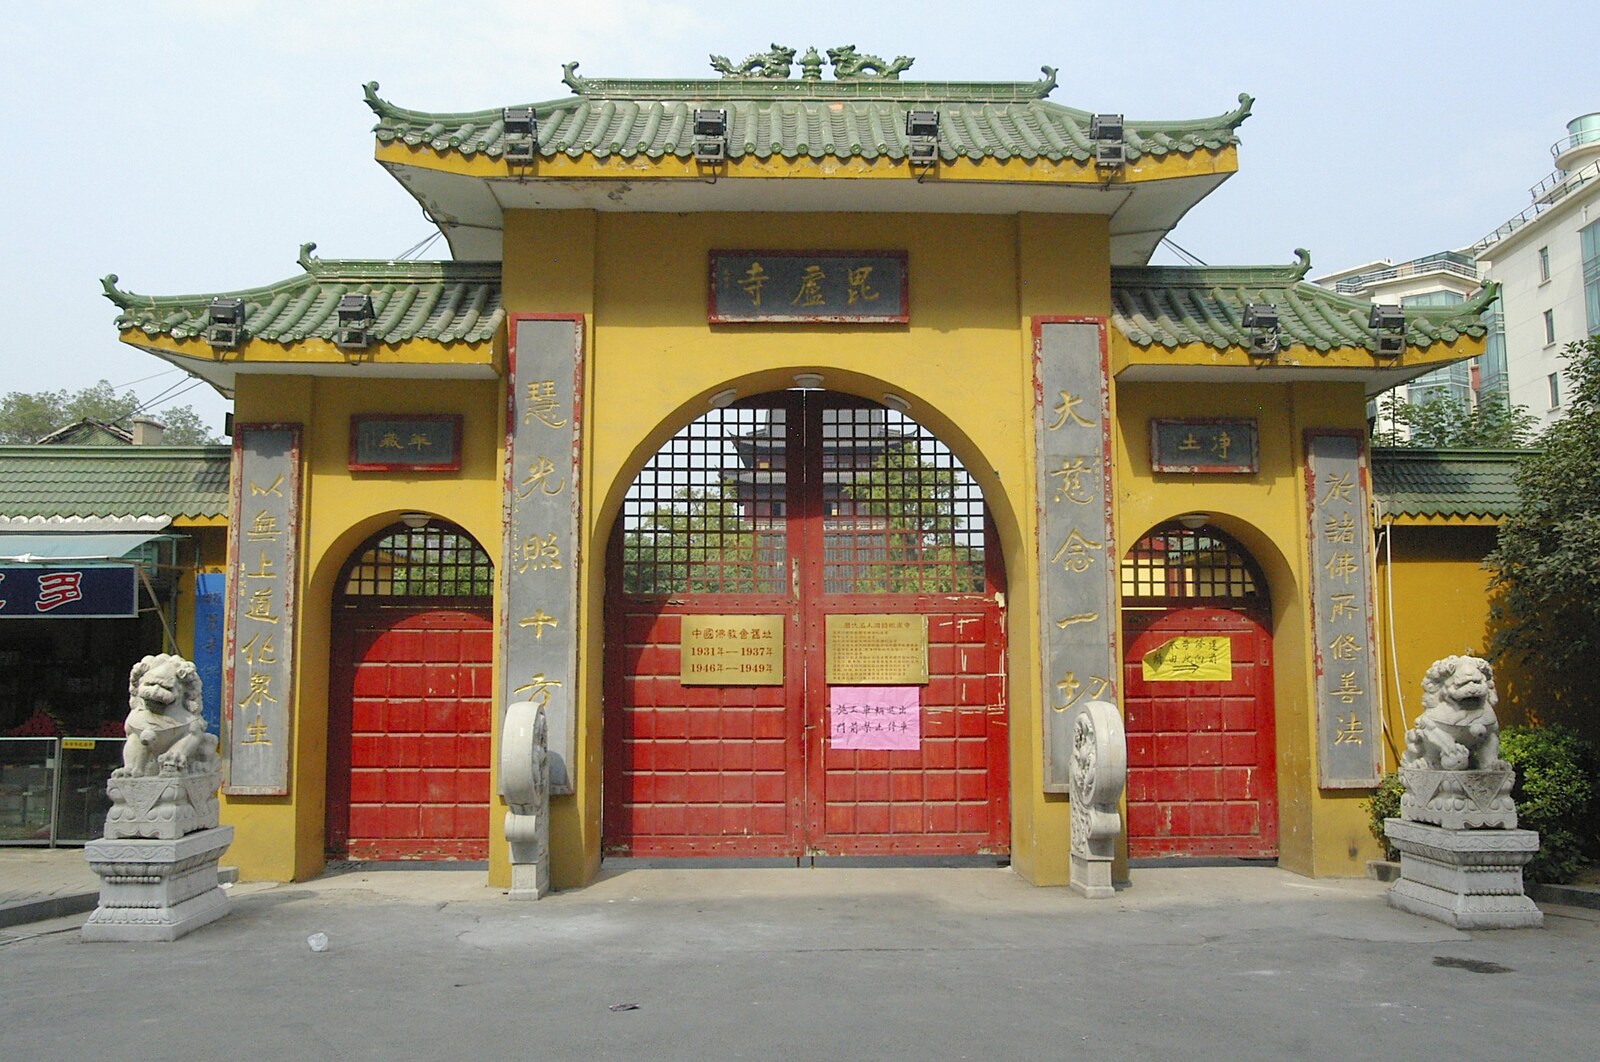 The front entrance to the temple from A Few Days in Nanjing, Jiangsu Province, China - 7th October 2006